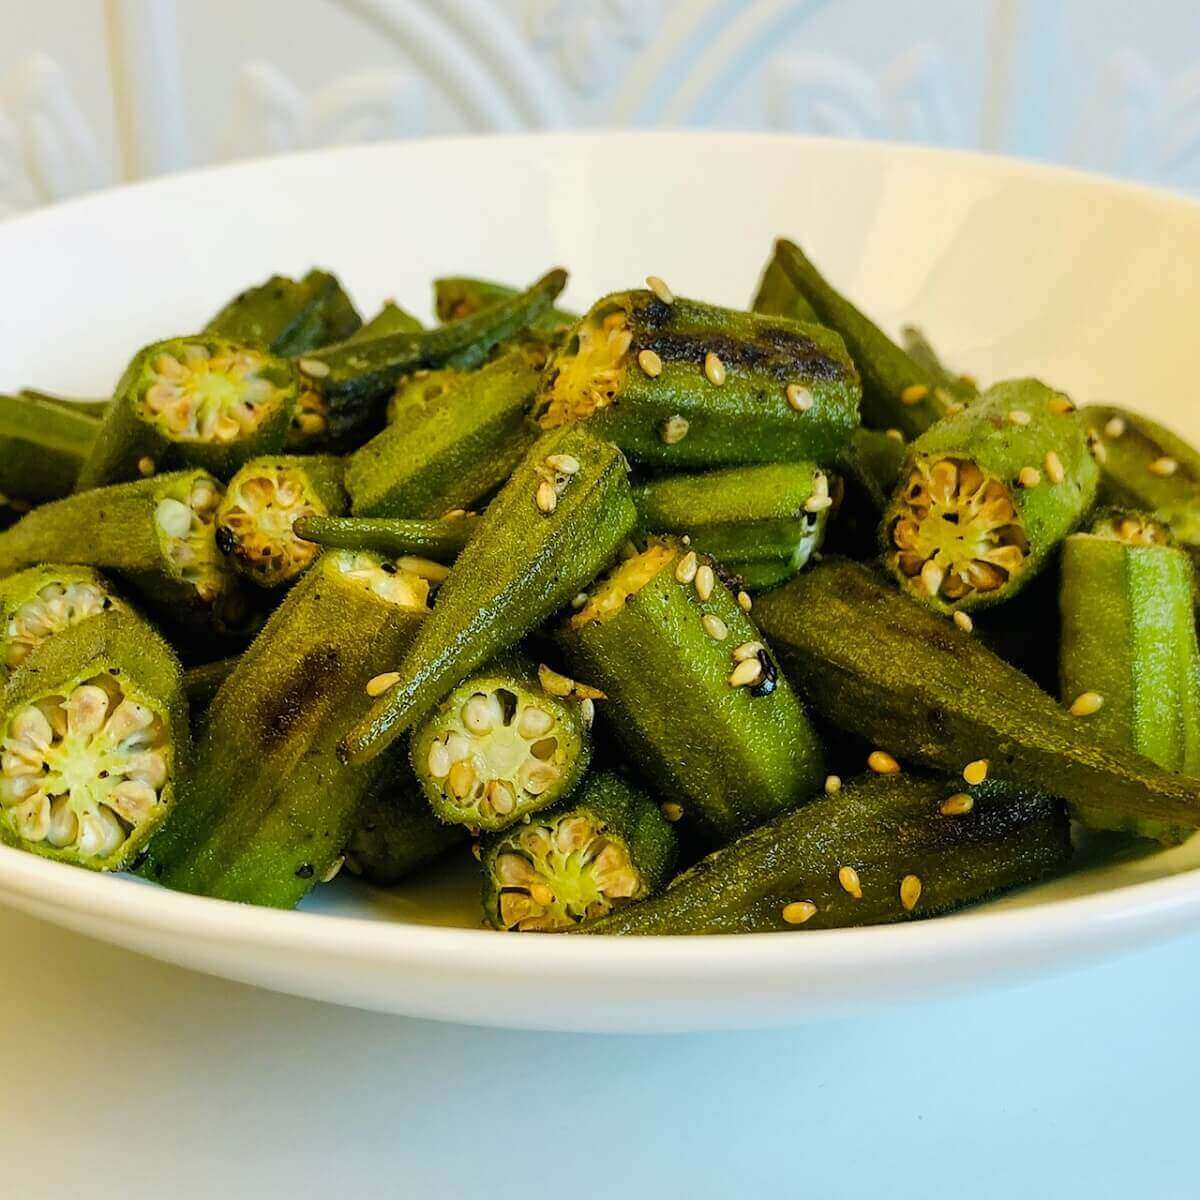 Oven roasted okra piled in a bowl.